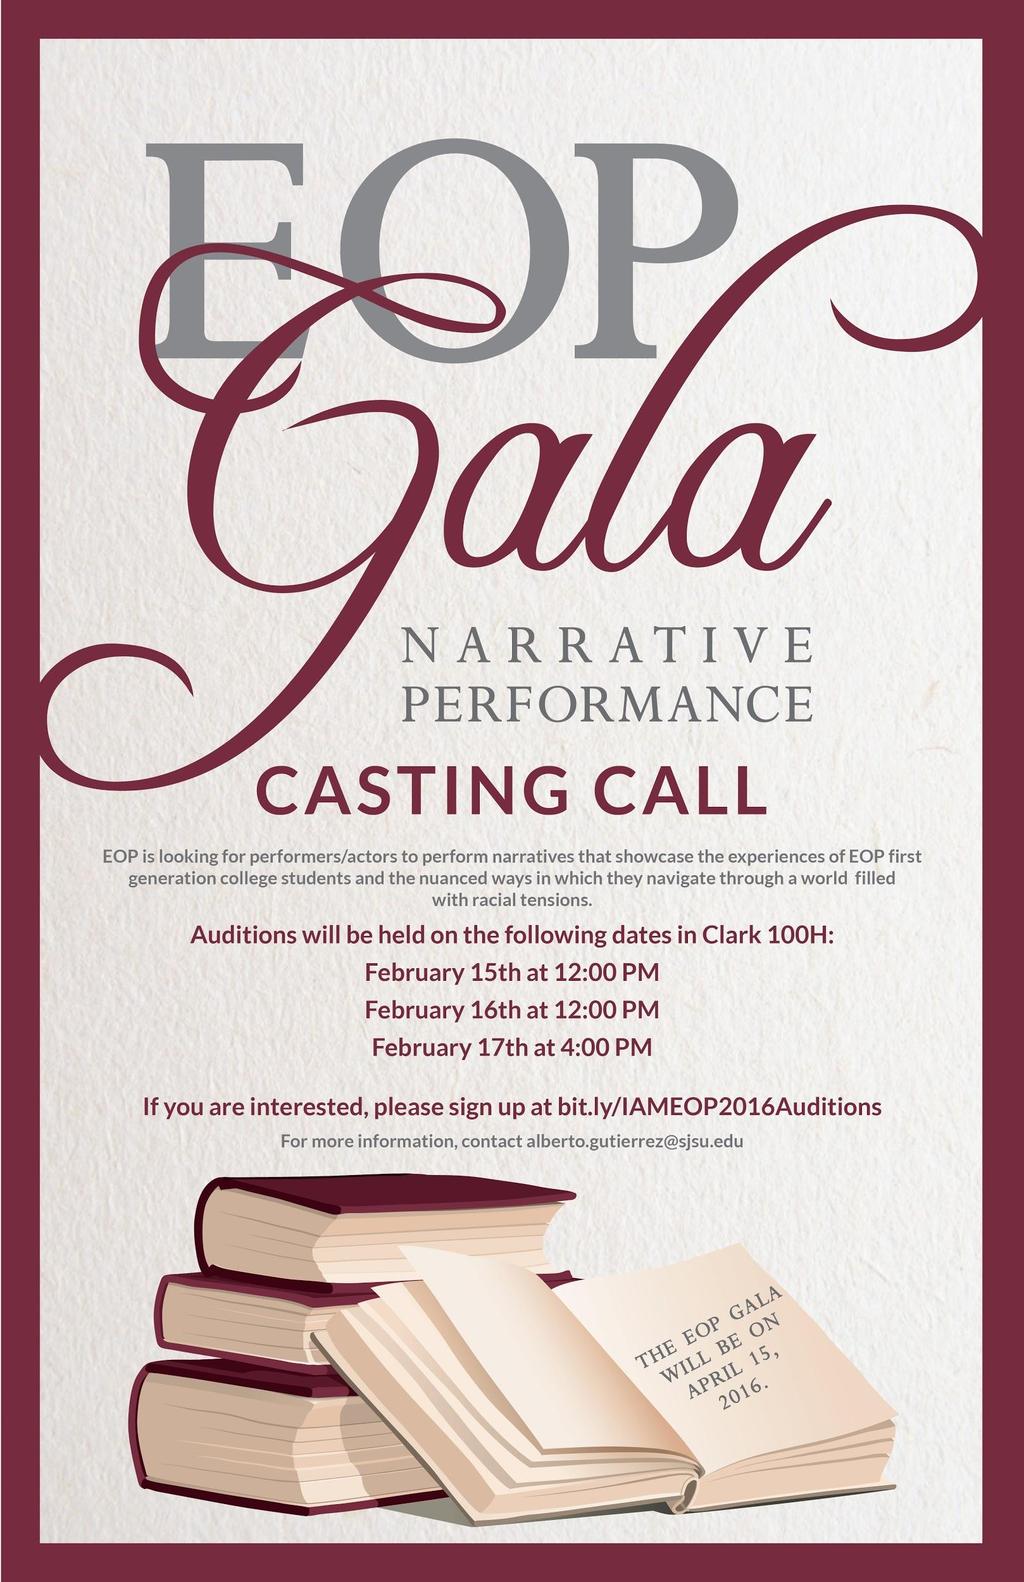 Auditions will be held on the following dates in Clark 100H: February 15th at 12:00 PM February 16th